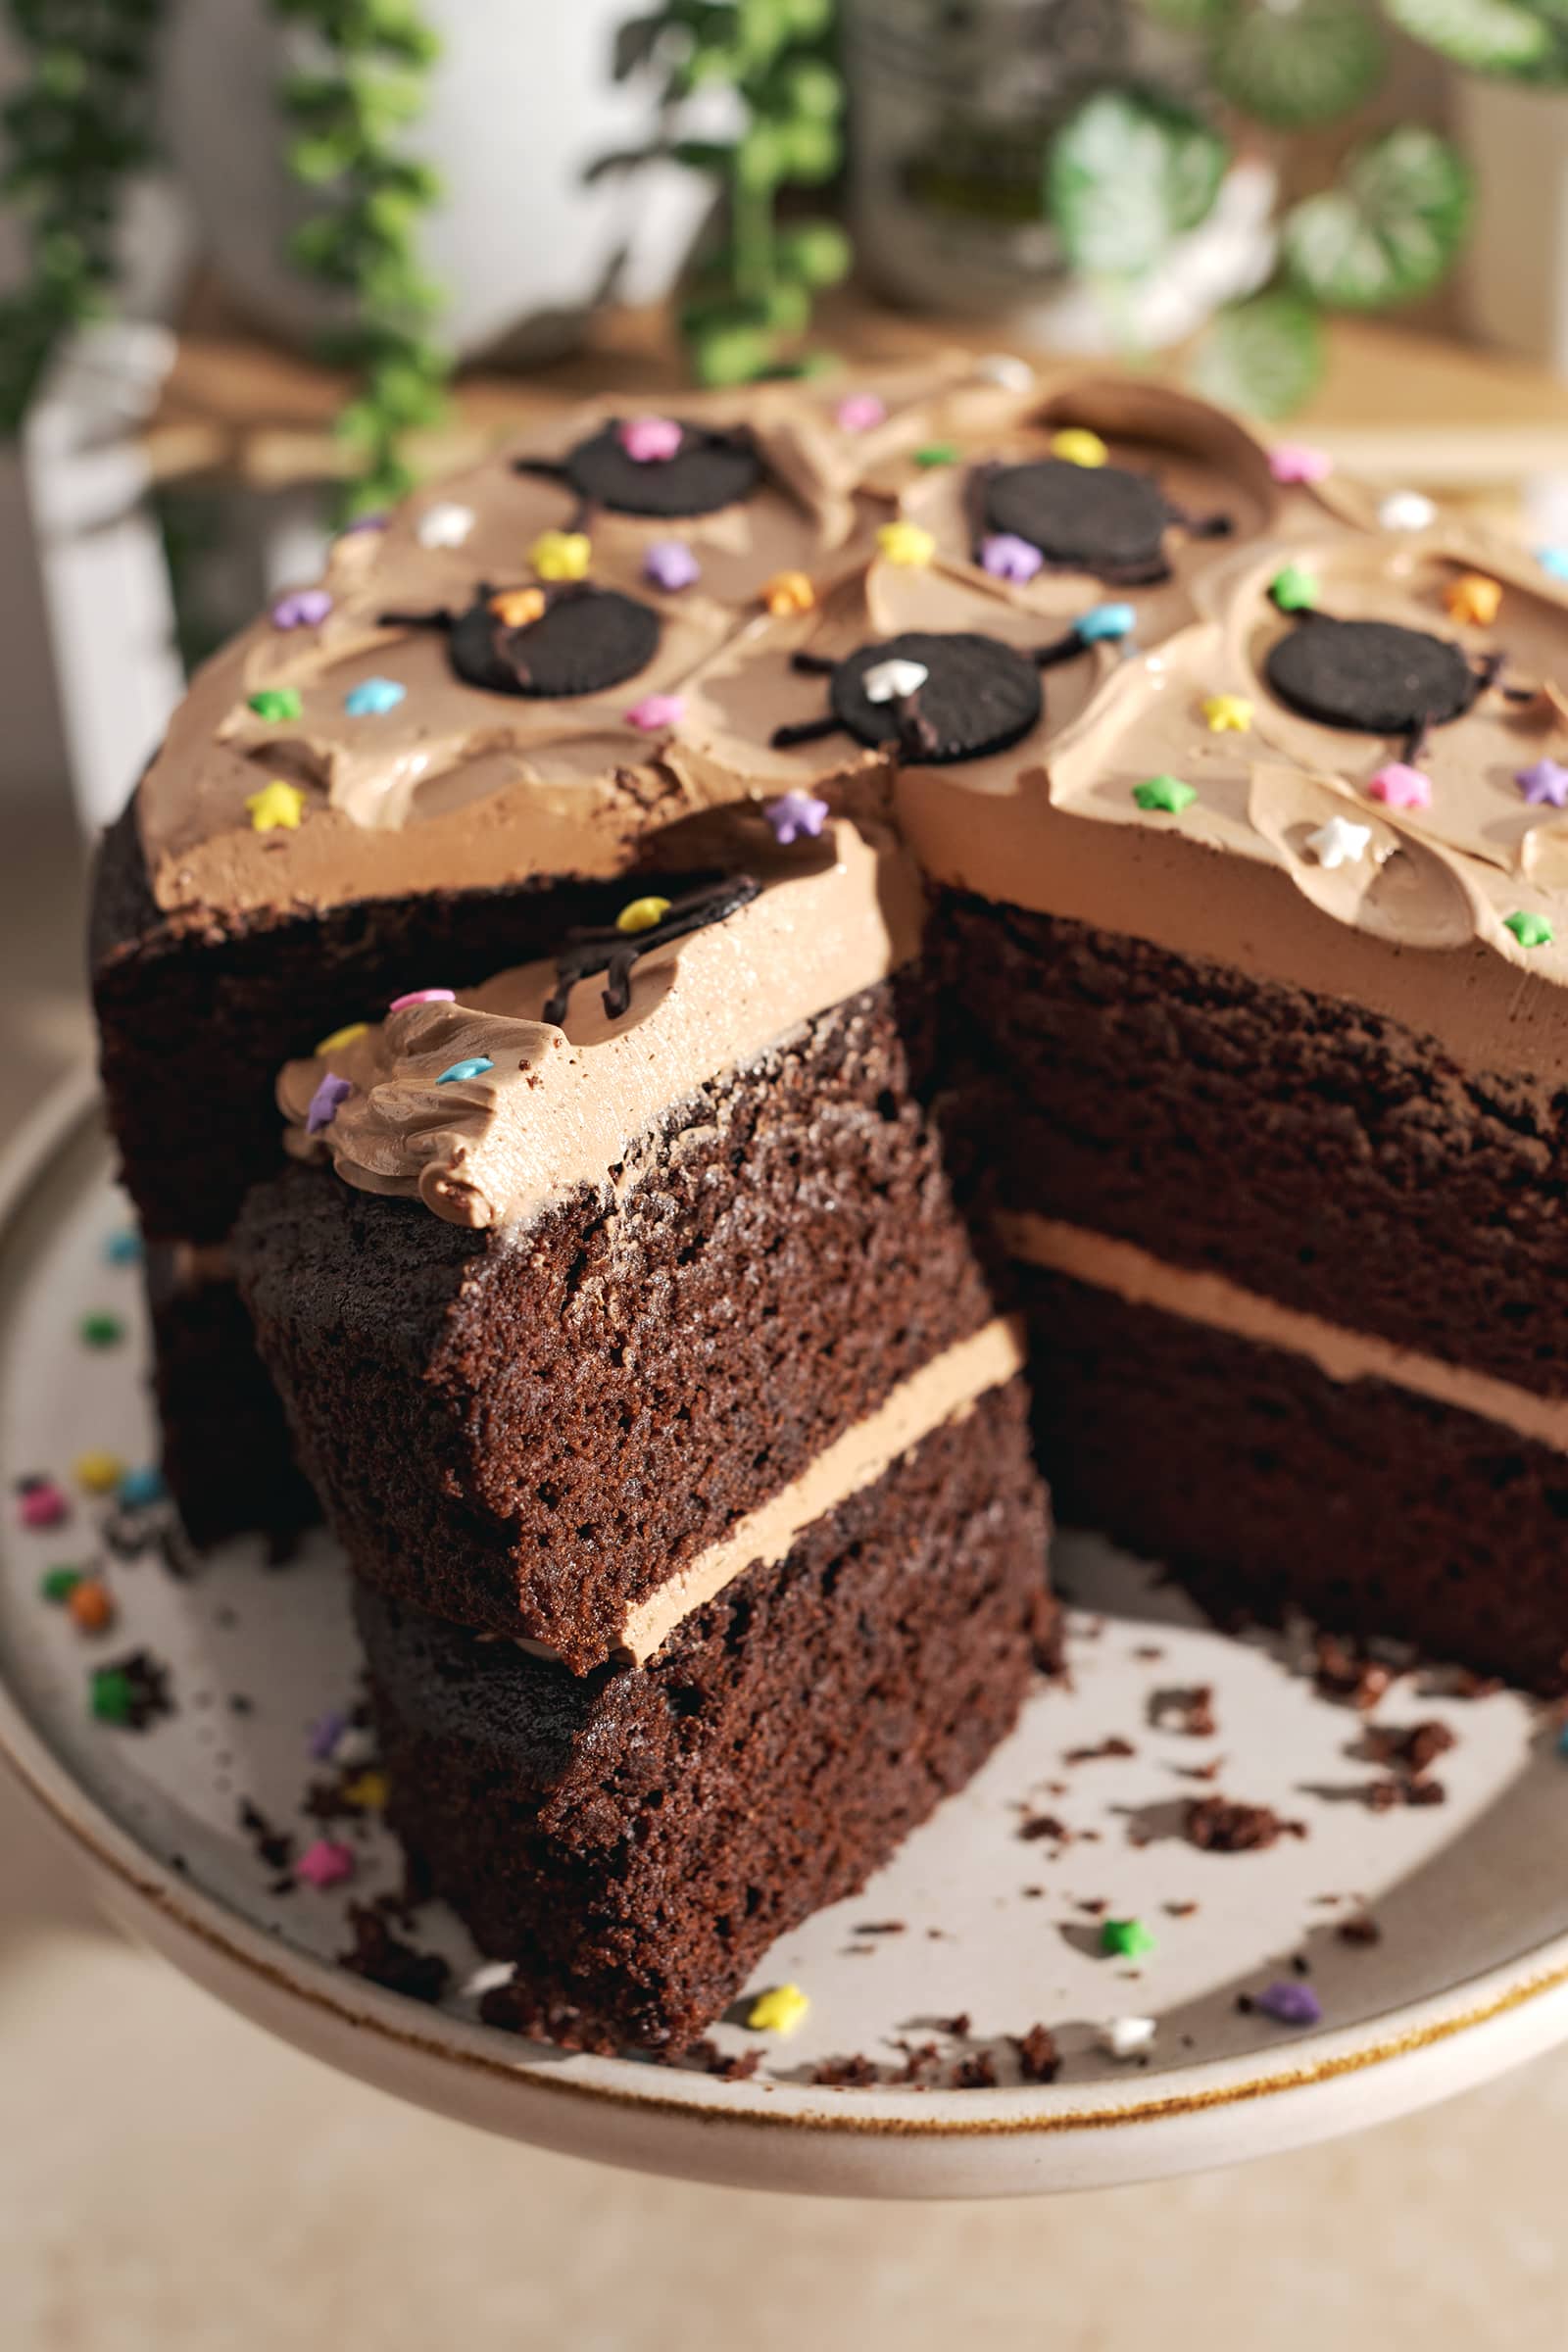 A slice of chocolate cake resting against the rest of the cake.